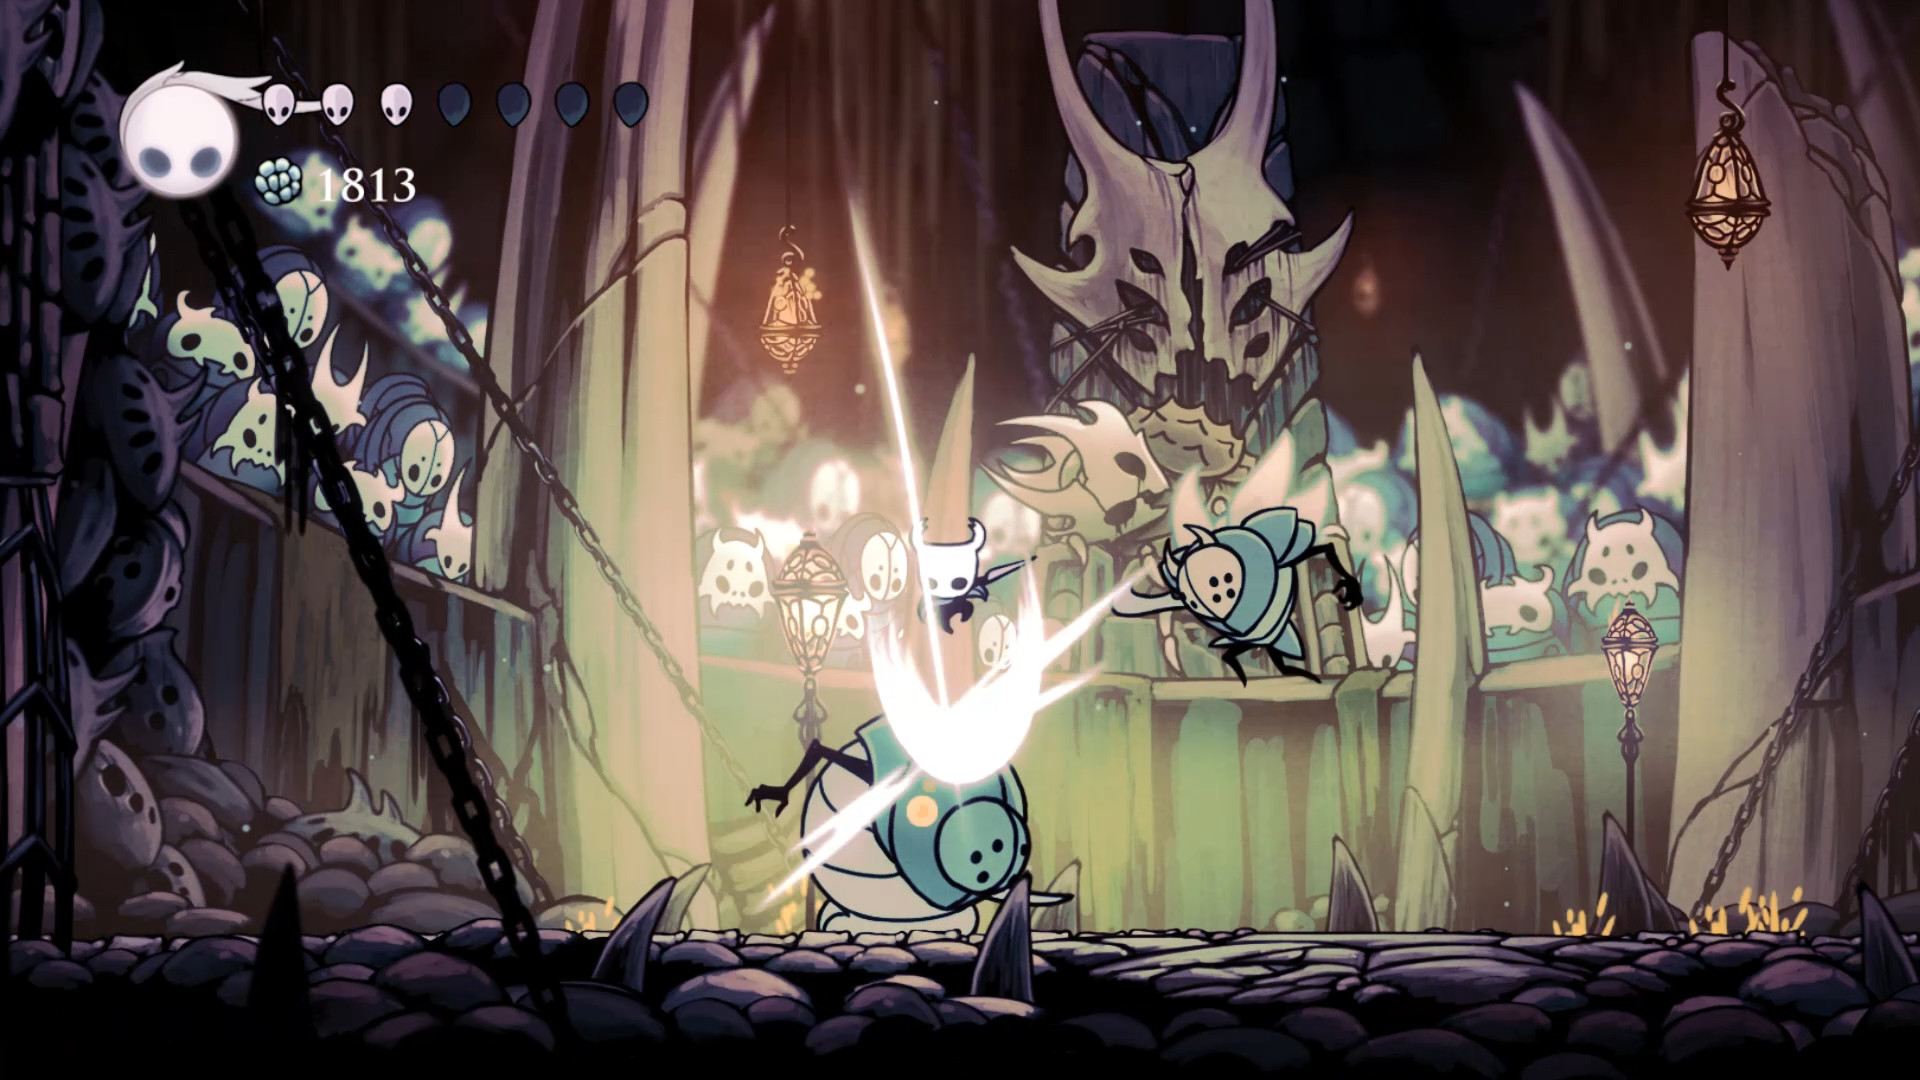 Hollow Knight - Official Soundtrack Featured Screenshot #1